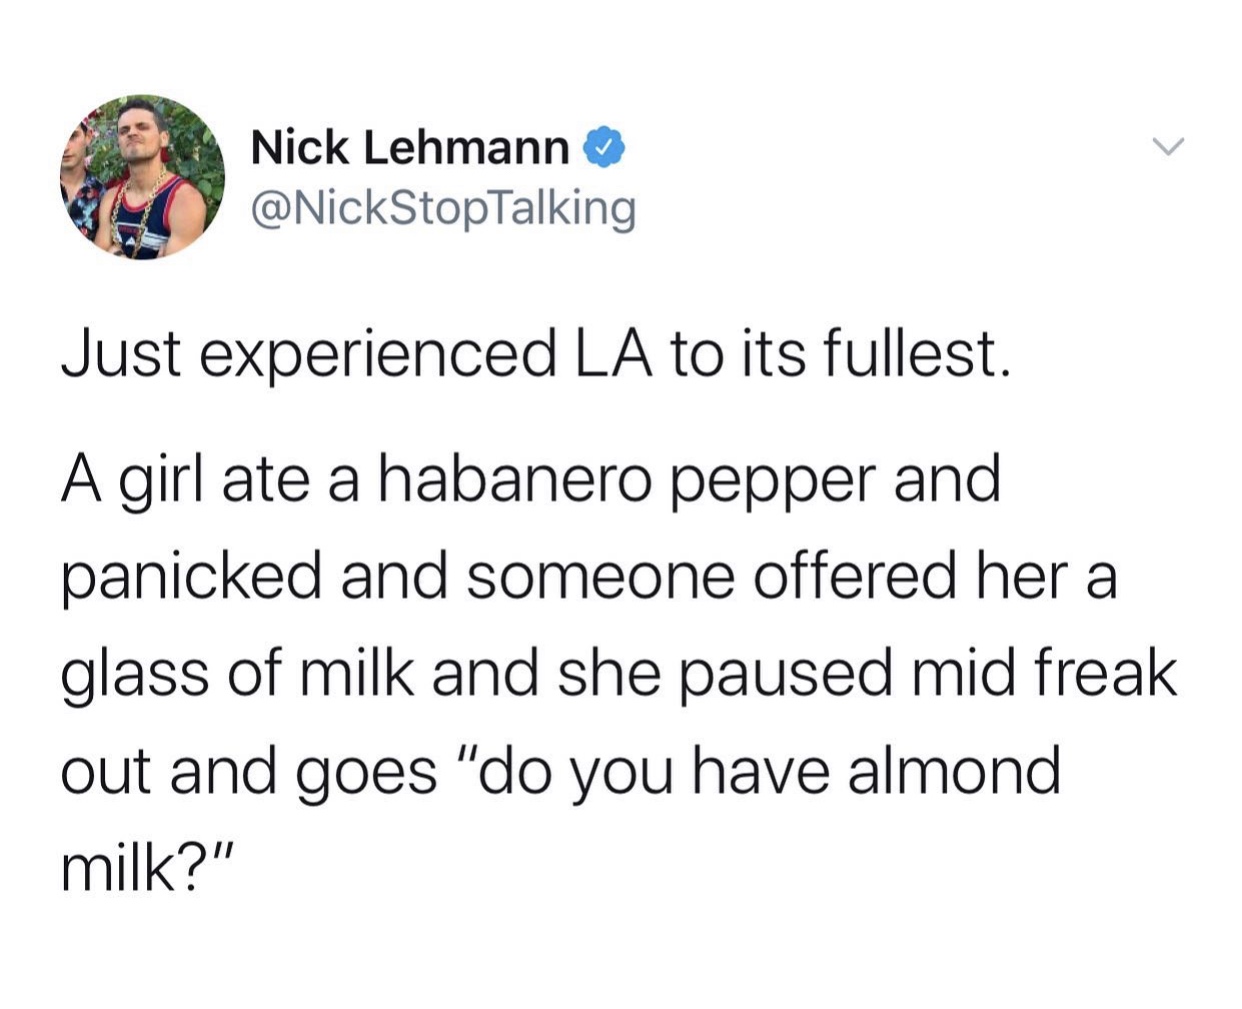 angle - Nick Lehmann Just experienced La to its fullest. A girl ate a habanero pepper and panicked and someone offered her a glass of milk and she paused mid freak out and goes "do you have almond milk?"